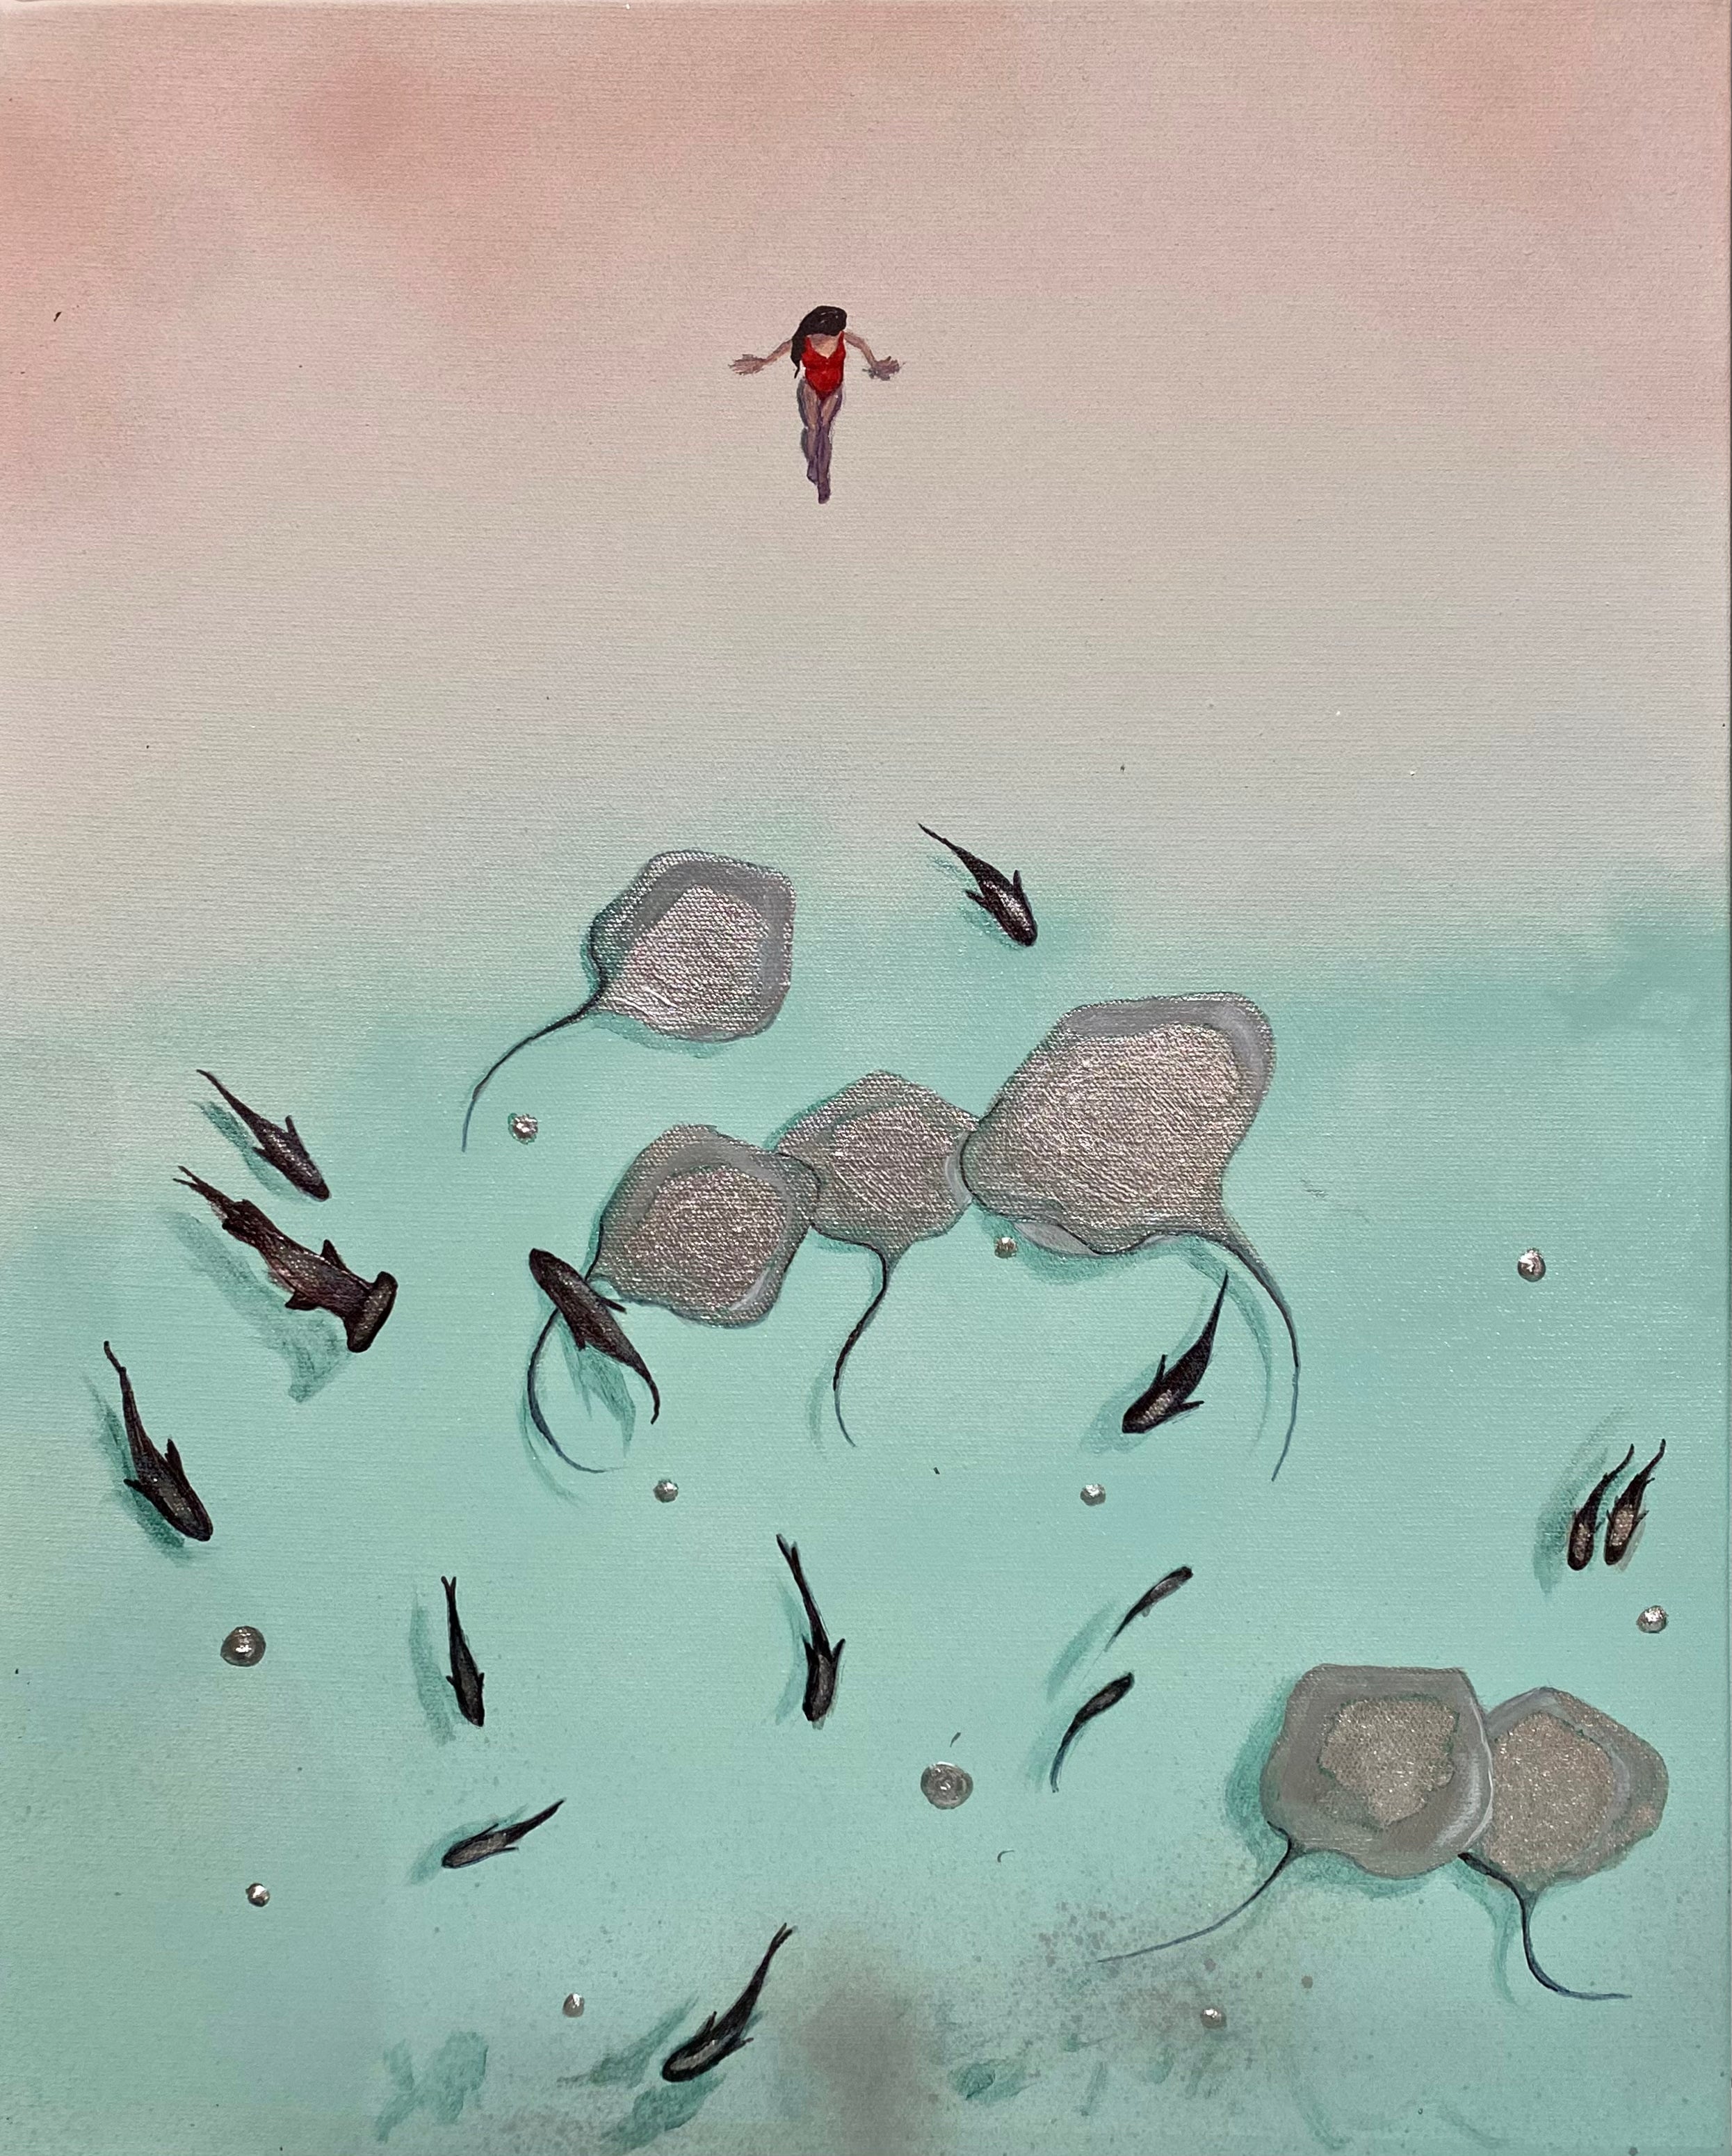 Someone is waiting for me 2 - Maldives - Sting rays - Ocean Mini Artwork